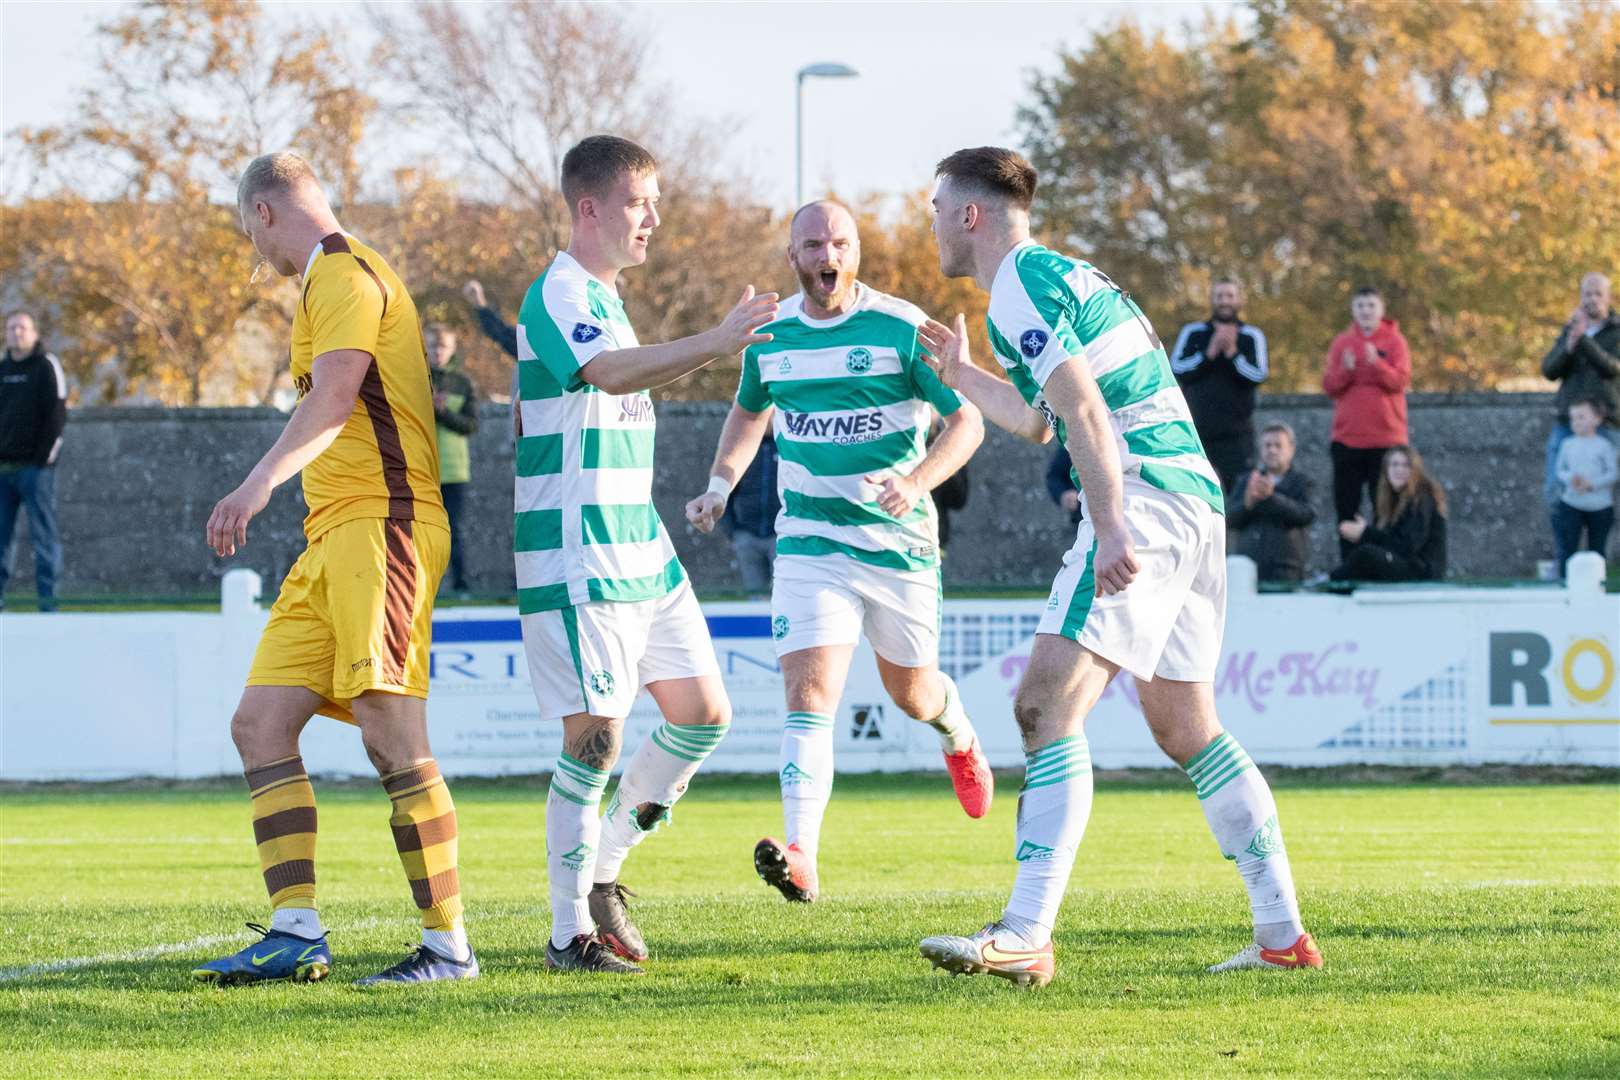 Celebrations after Buckie Thistle's Jack Murray heads home the opening goal for the Jags. ..Buckie Thistle FC (2) vs Forres Mechanics FC (0) - Highland Football League 22/23 - Victoria Park, Buckie 29/10/2022...Picture: Daniel Forsyth..